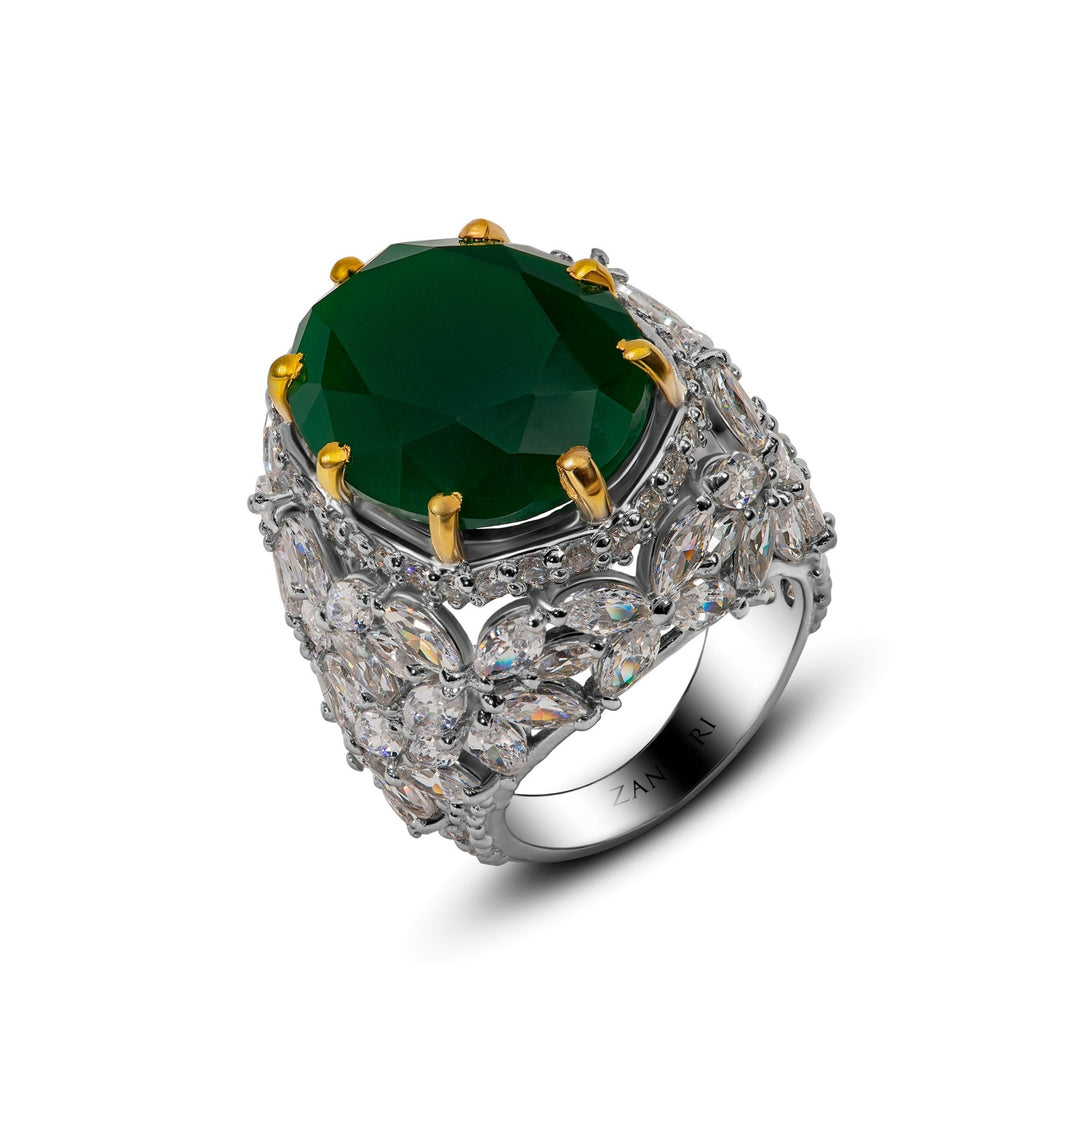 Elegant Jade Stone Ring with Zirconia Stones in Sterling Silver 925 Rhodium Plated